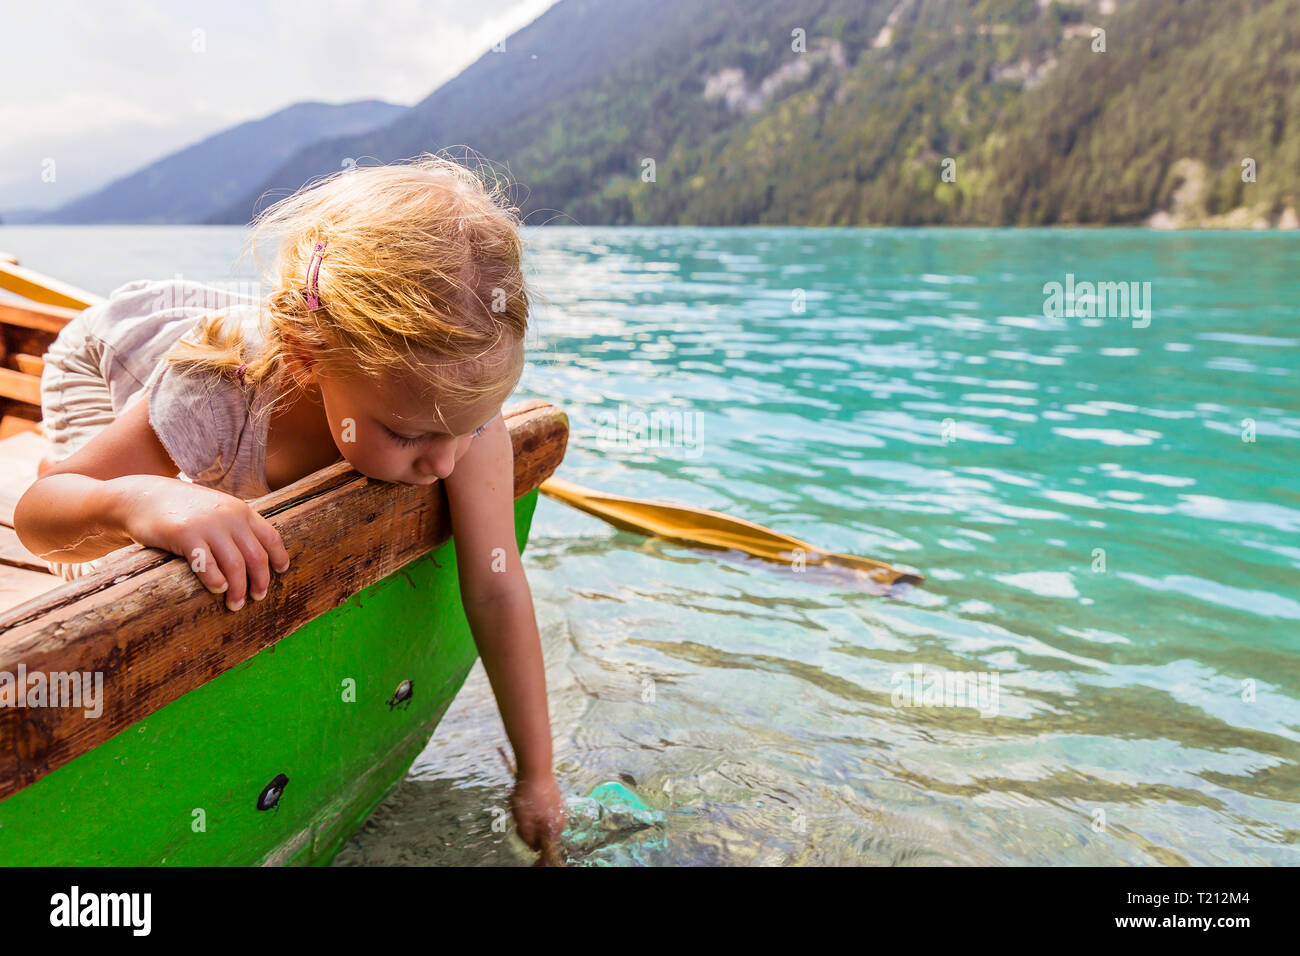 Austria, Carinthia, Weissensee, girl in rowing boat putting her hand in the water Stock Photo